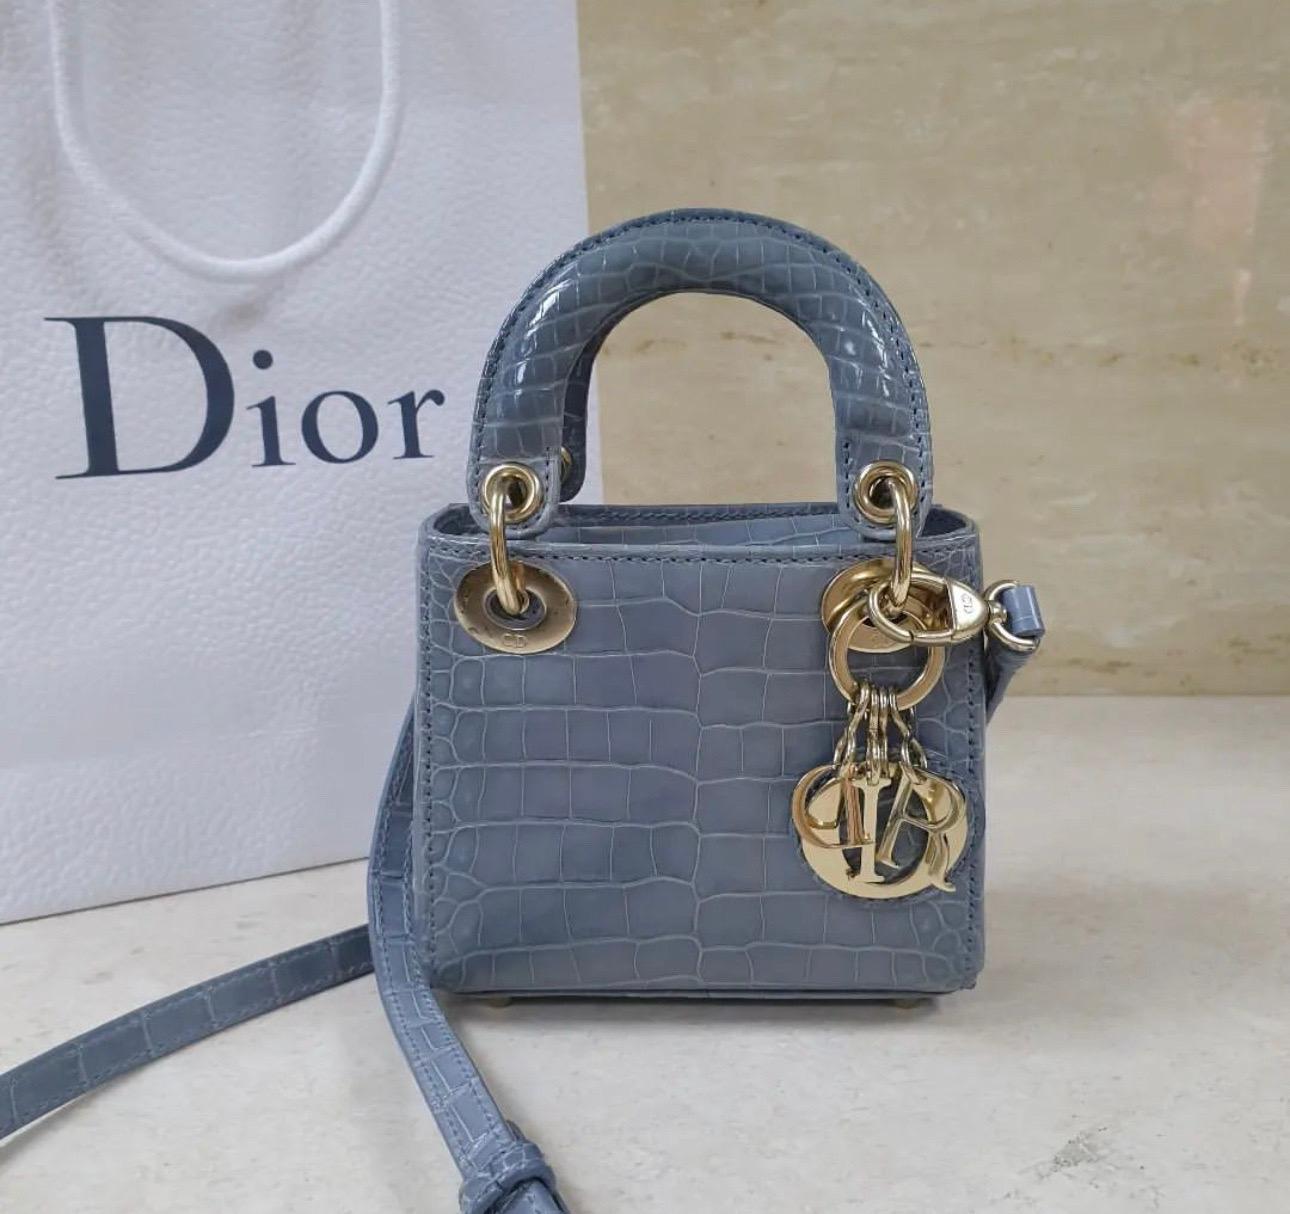 Beautiful blue colour lady Dior micro.
The micro size is obviously very small and can only fit few items like phone, lipstick and keys.
12*10*50 cm
Very good condition.
No box. No dust bag